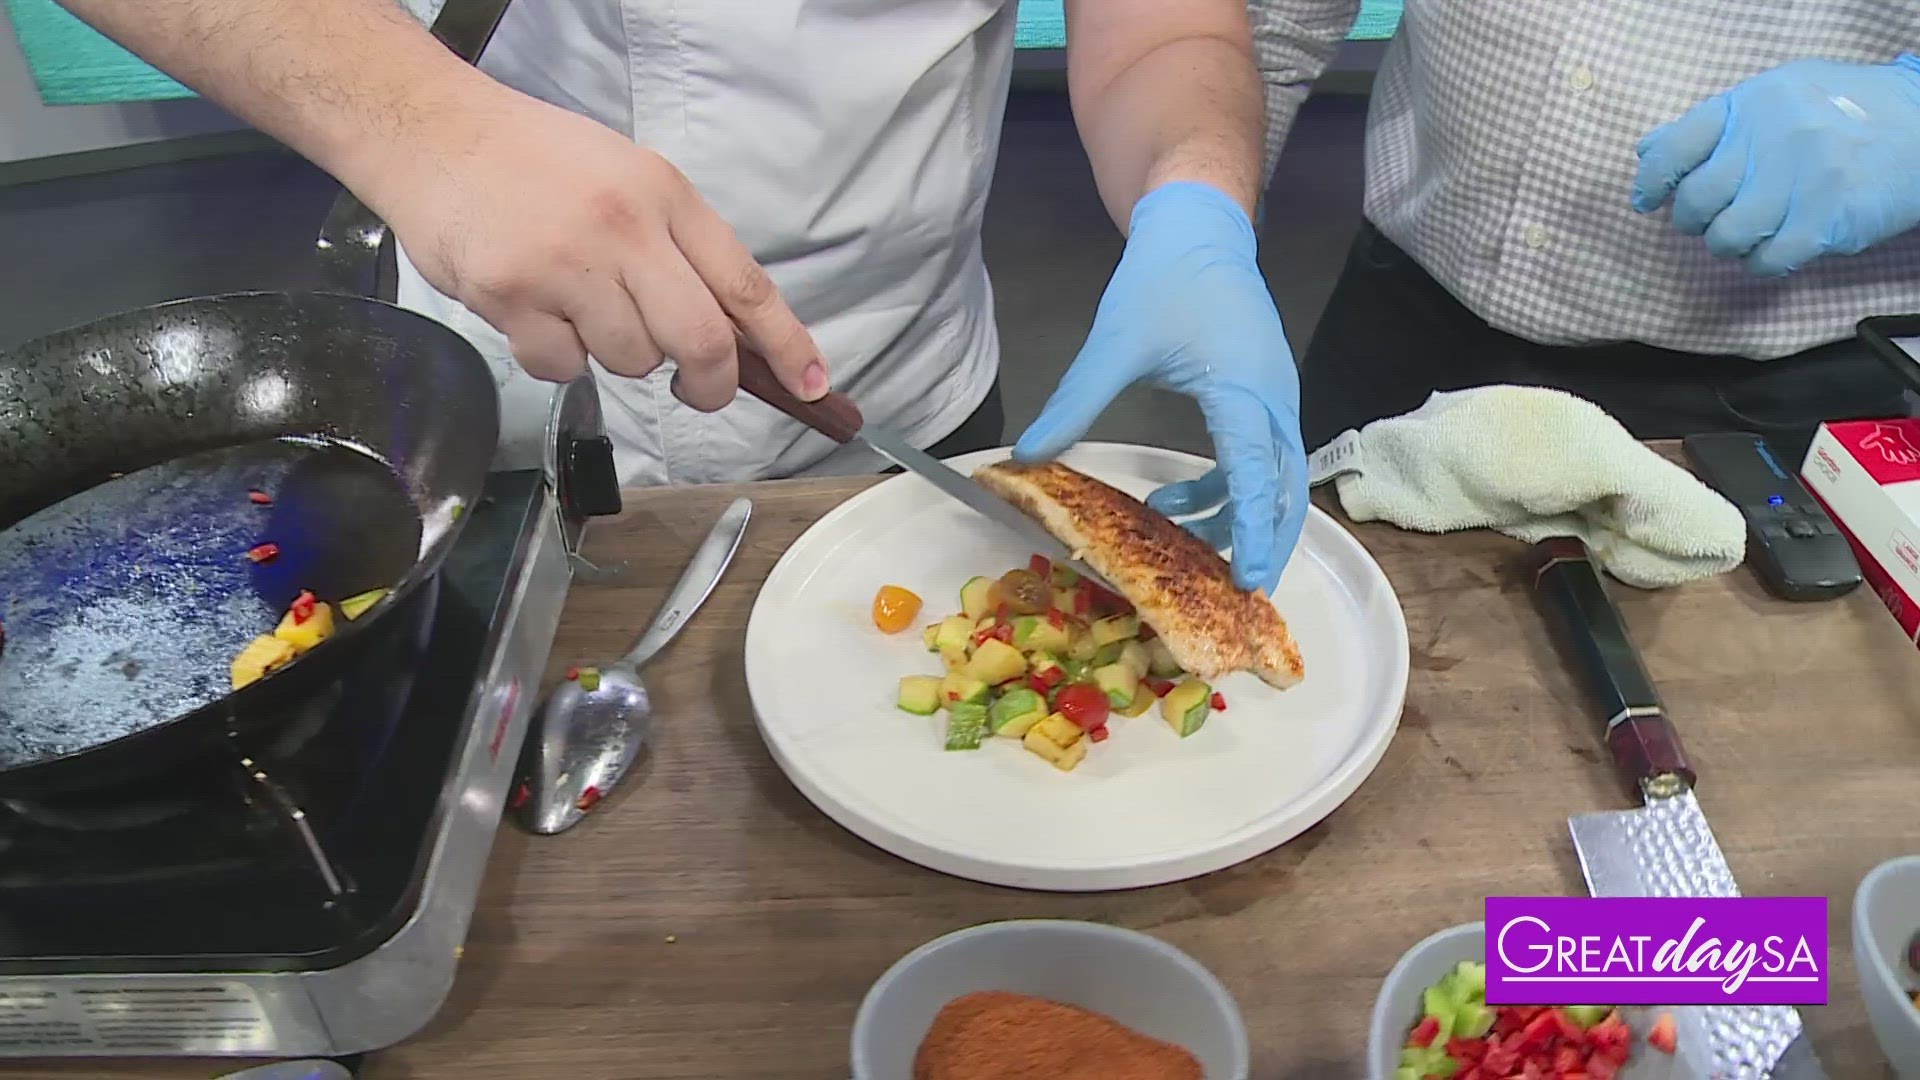 Chef Joseph Martinez with Tributary shares an array of summer dishes that you can make at home.